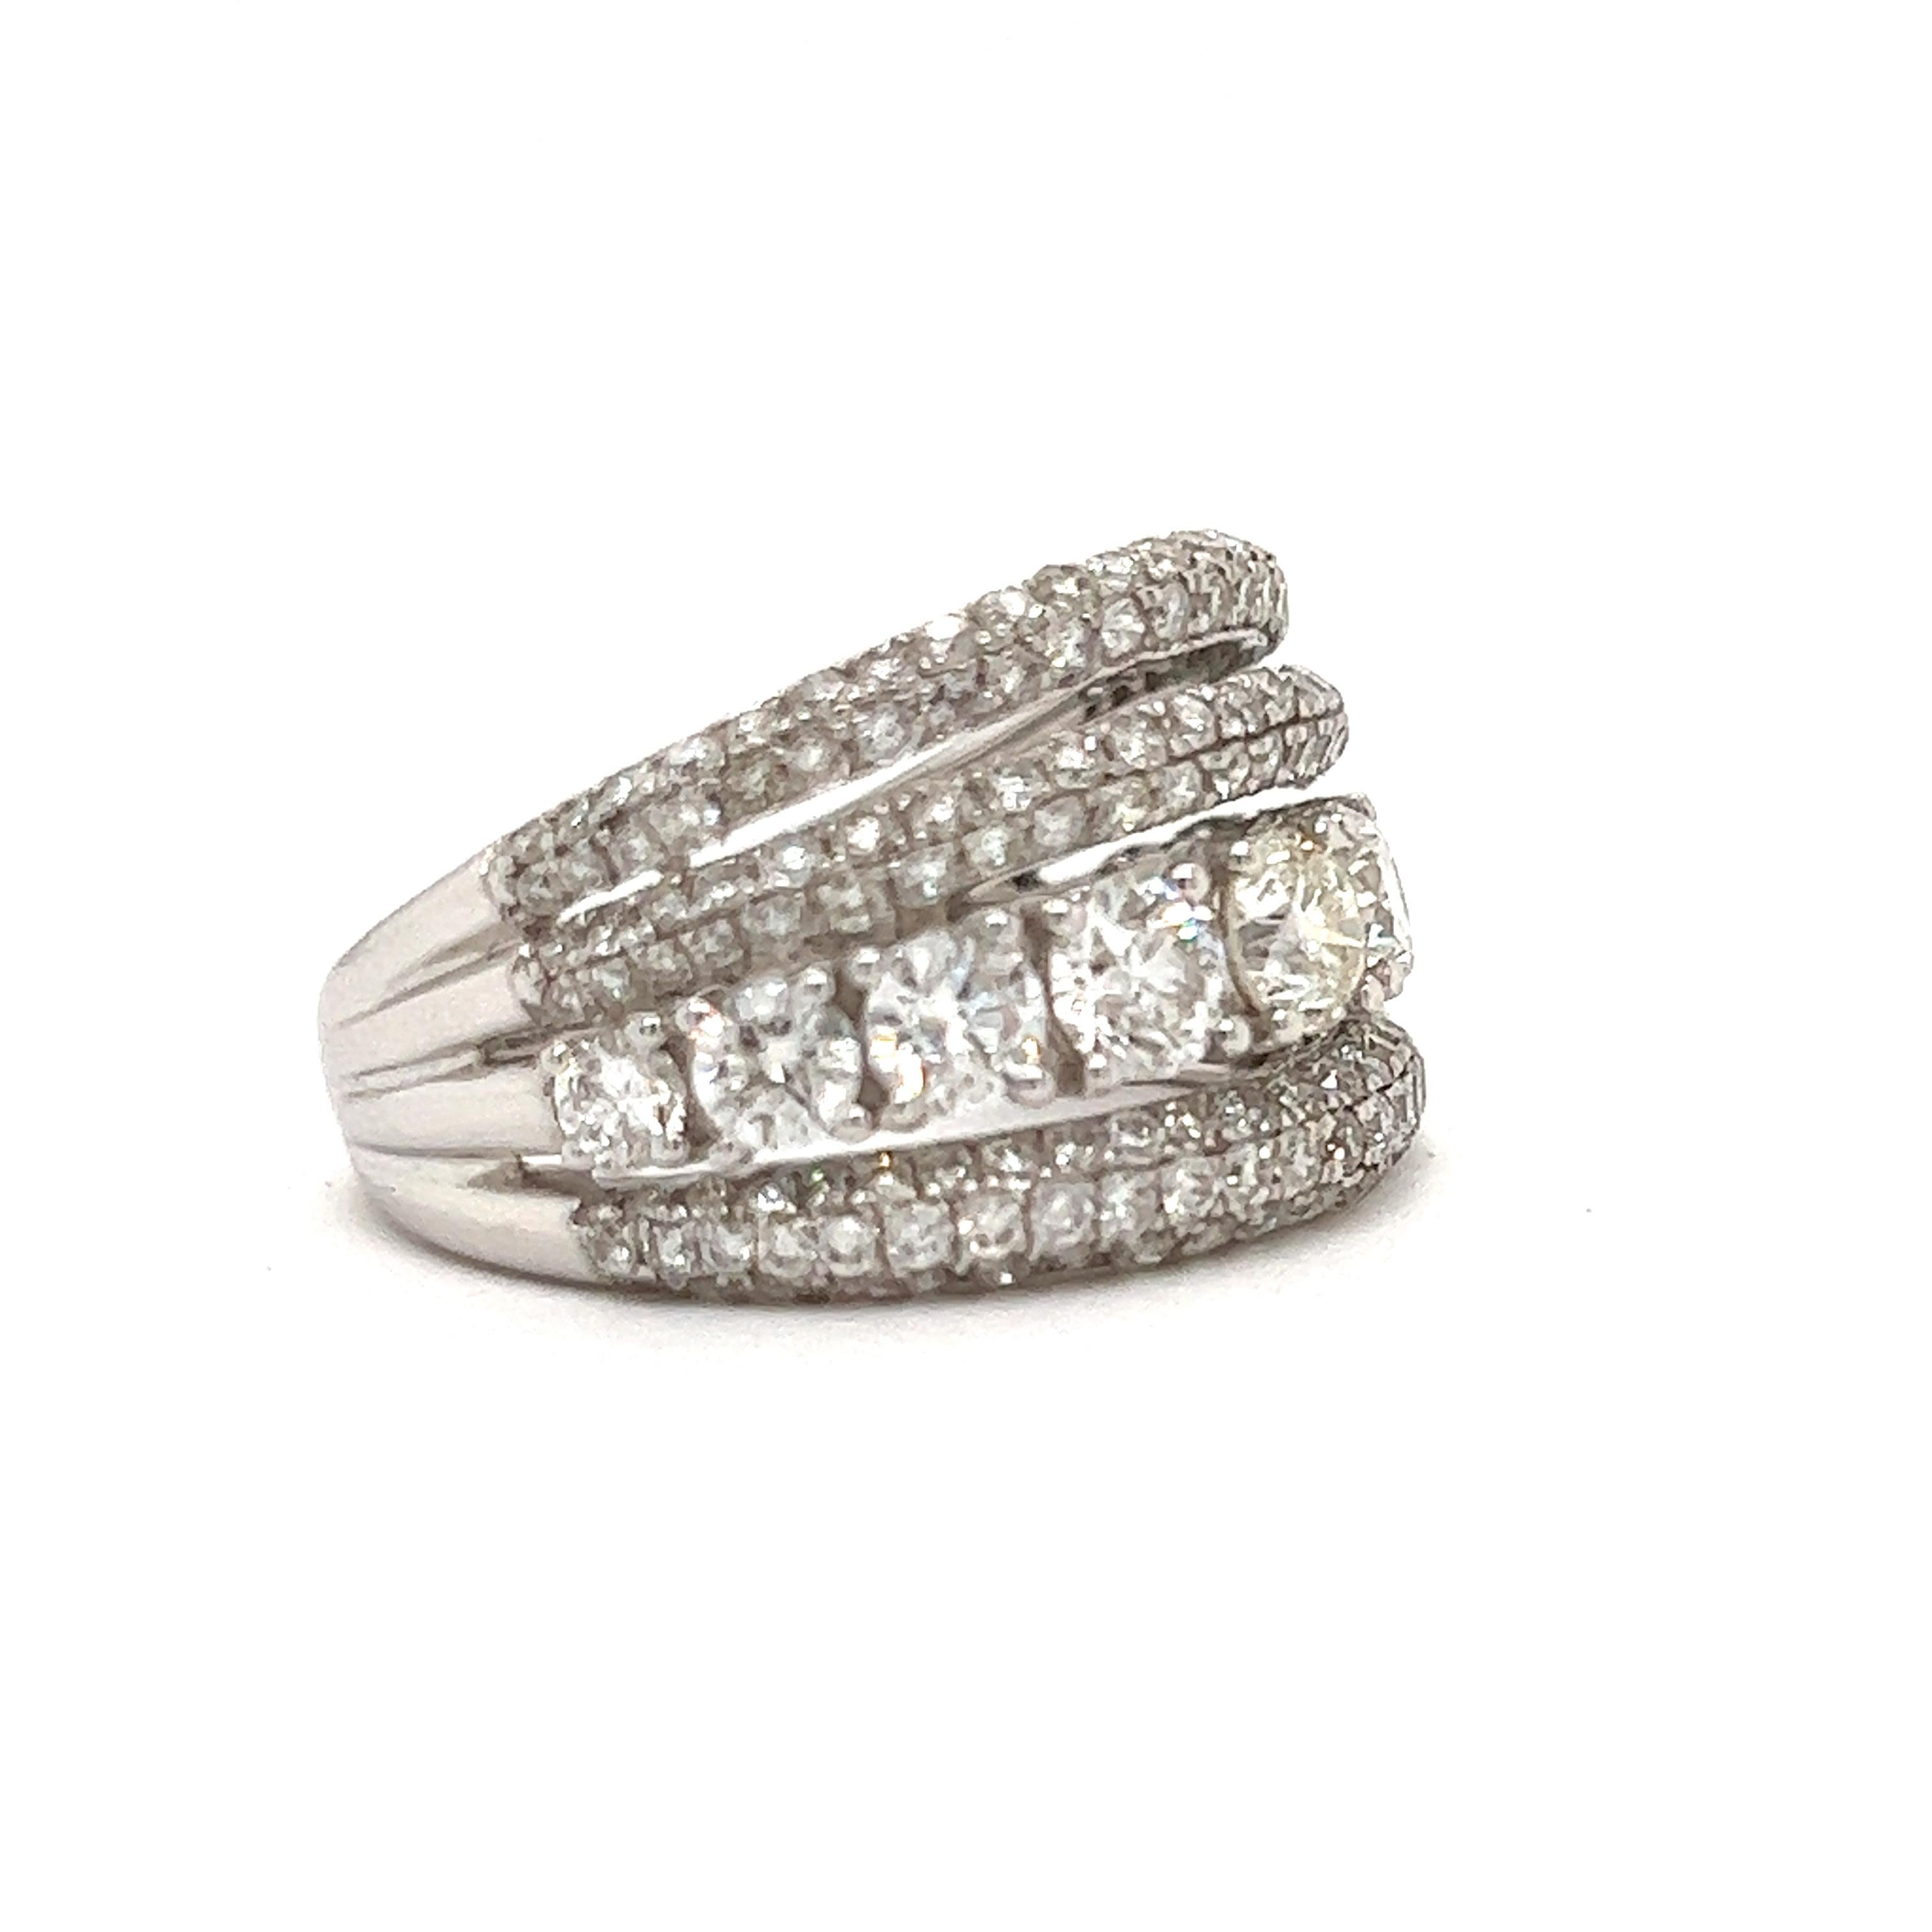 This stunning multi row designer band is 2.58 ctw in shimmering round and pave diamonds, a total of 174 diamonds.  Set in 5.50 grams of 18K white gold this outstanding ring makes a statement.  Perfect for an anniversary gift, push present or wedding